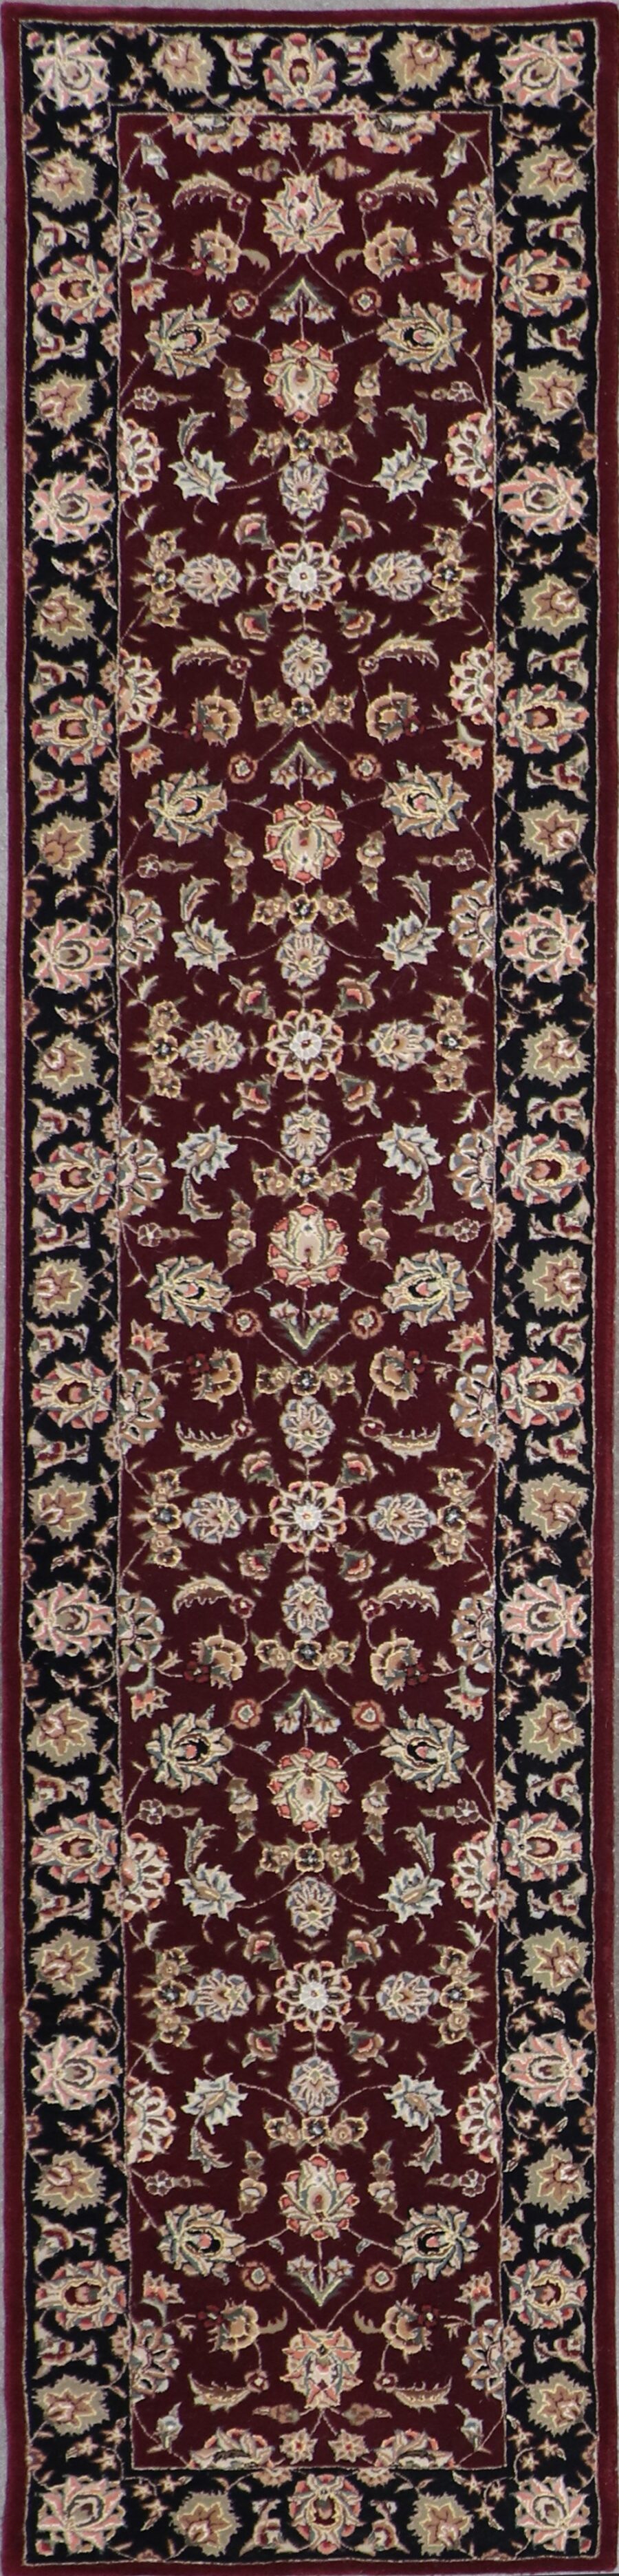 2'7"x11'9" Decorative Wool & Silk Hand-Tufted Rug - Direct Rug Import | Rugs in Chicago, Indiana,South Bend,Granger